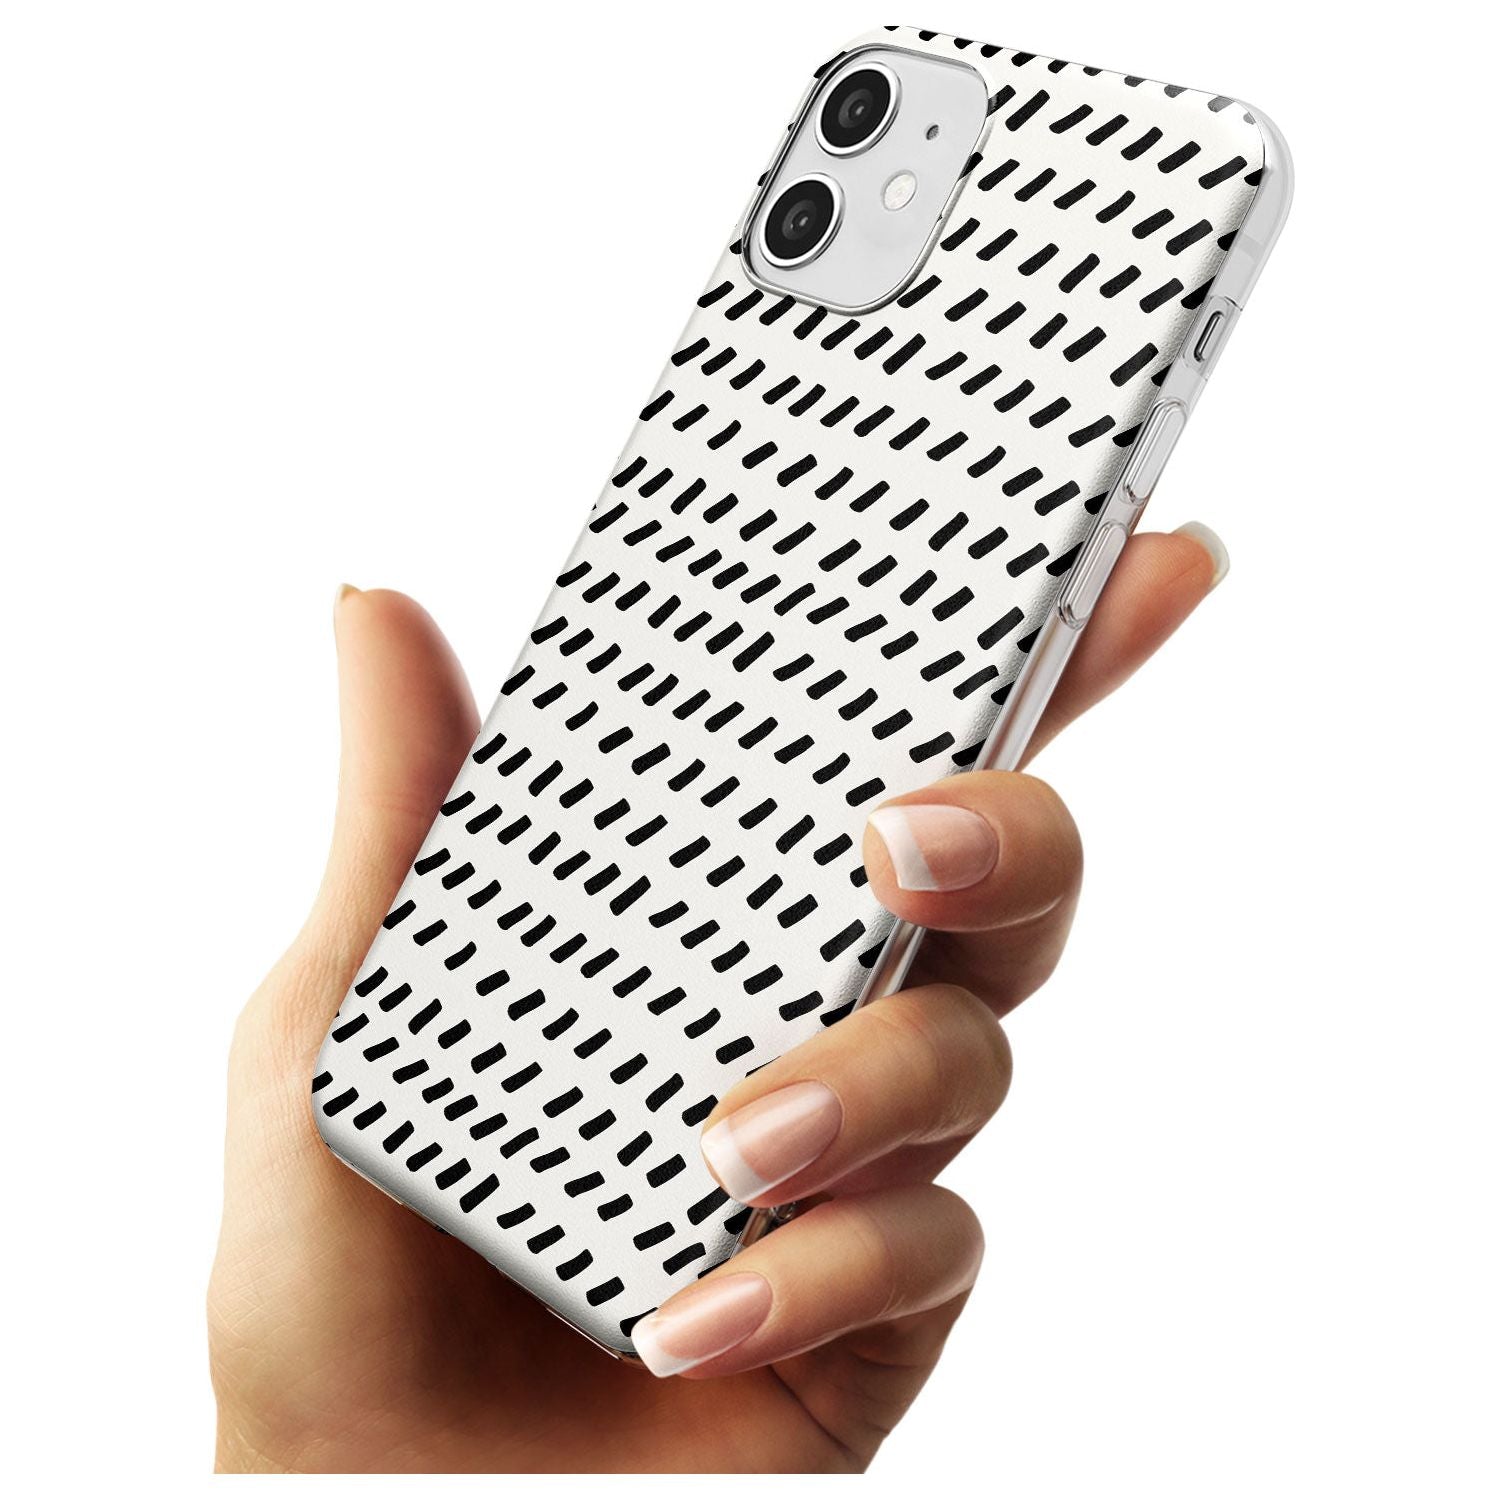 Hand Drawn Lines Pattern Slim TPU Phone Case for iPhone 11